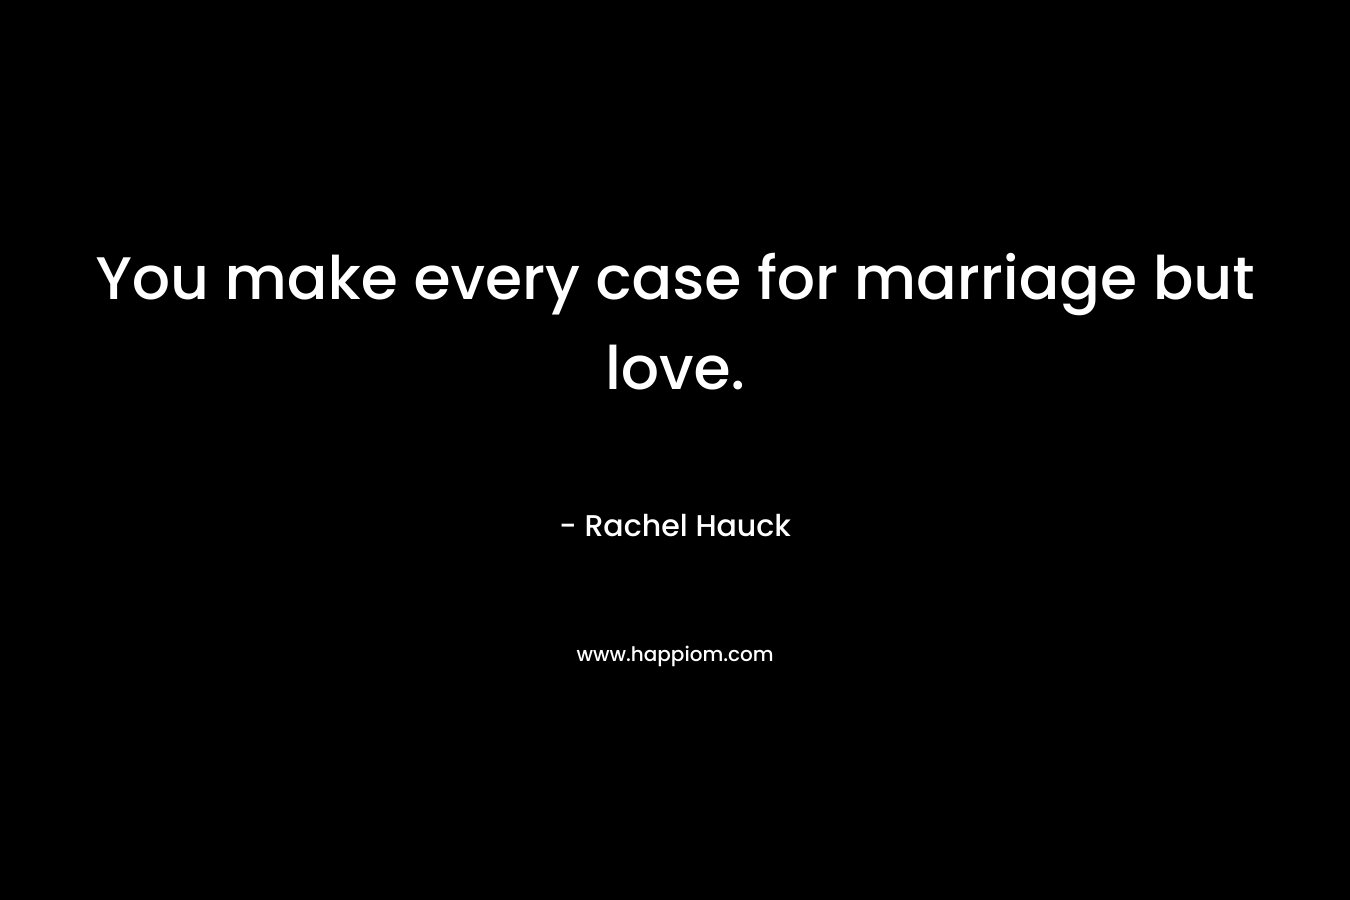 You make every case for marriage but love.